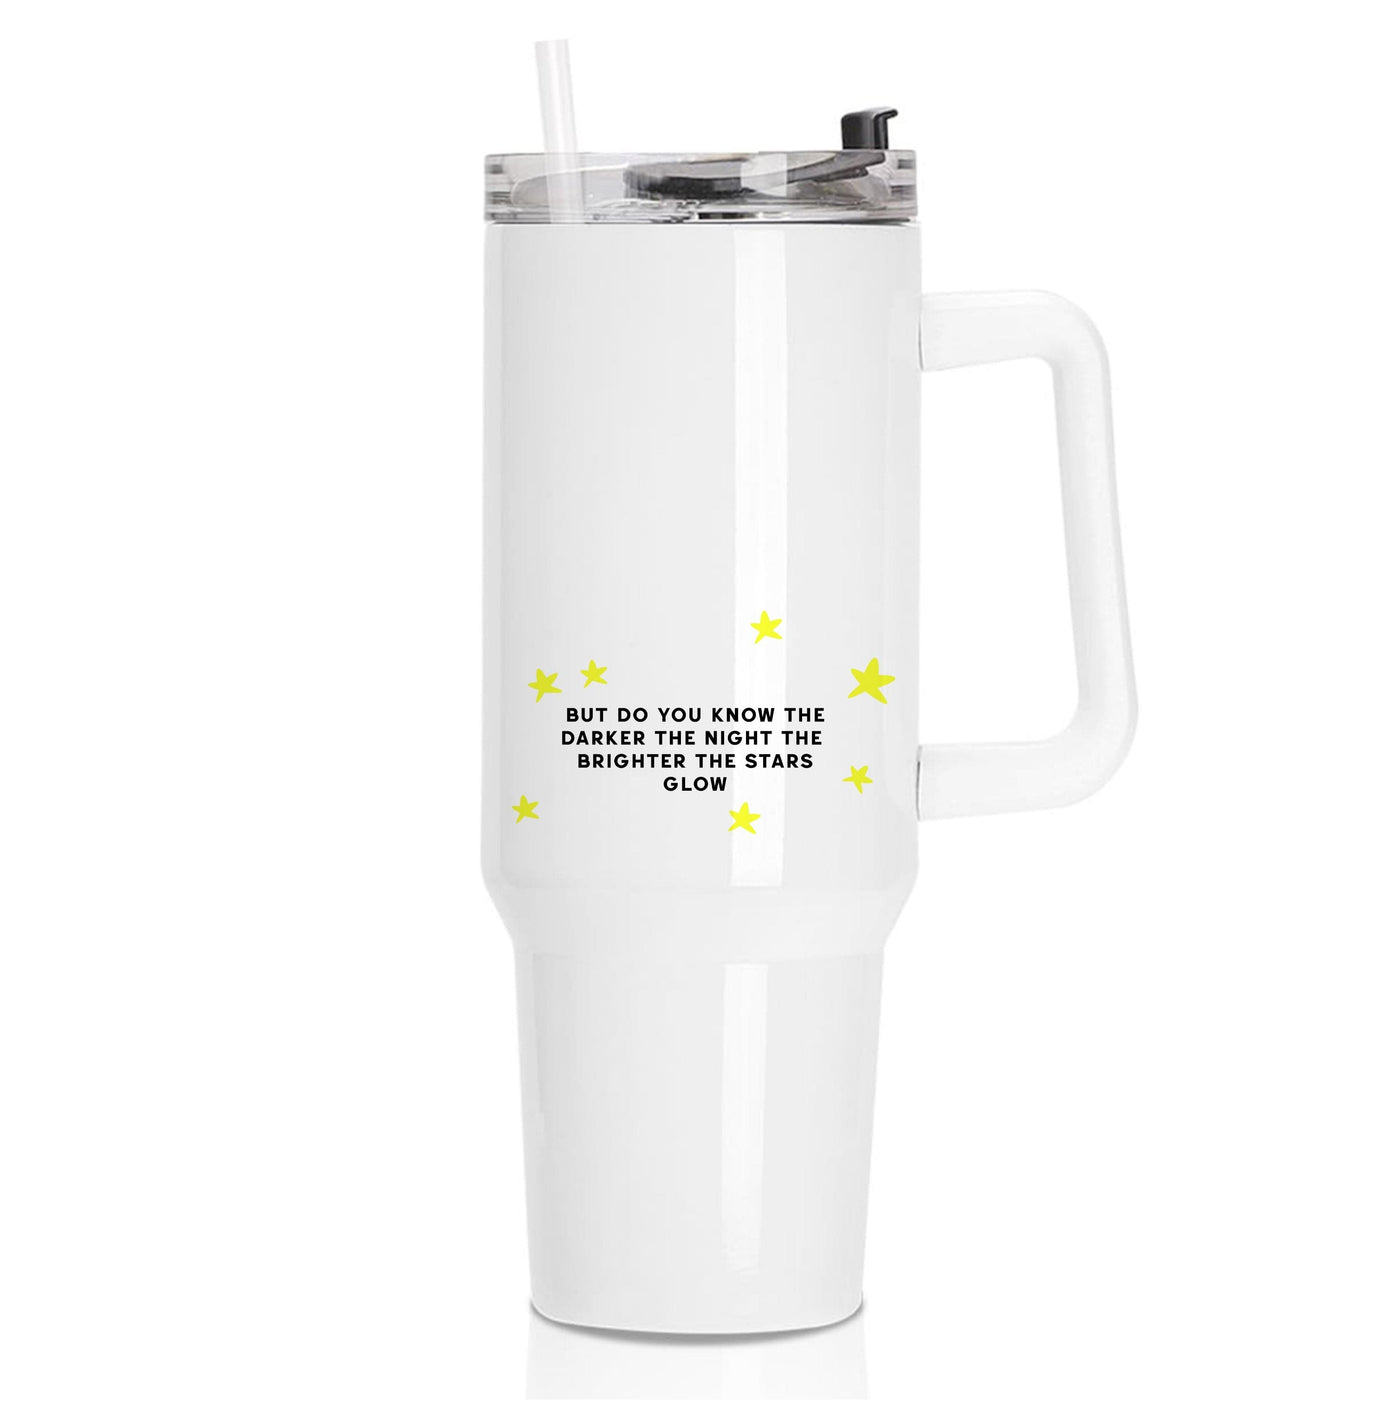 Brighter The Stars Glow - Katy Perry Tumbler